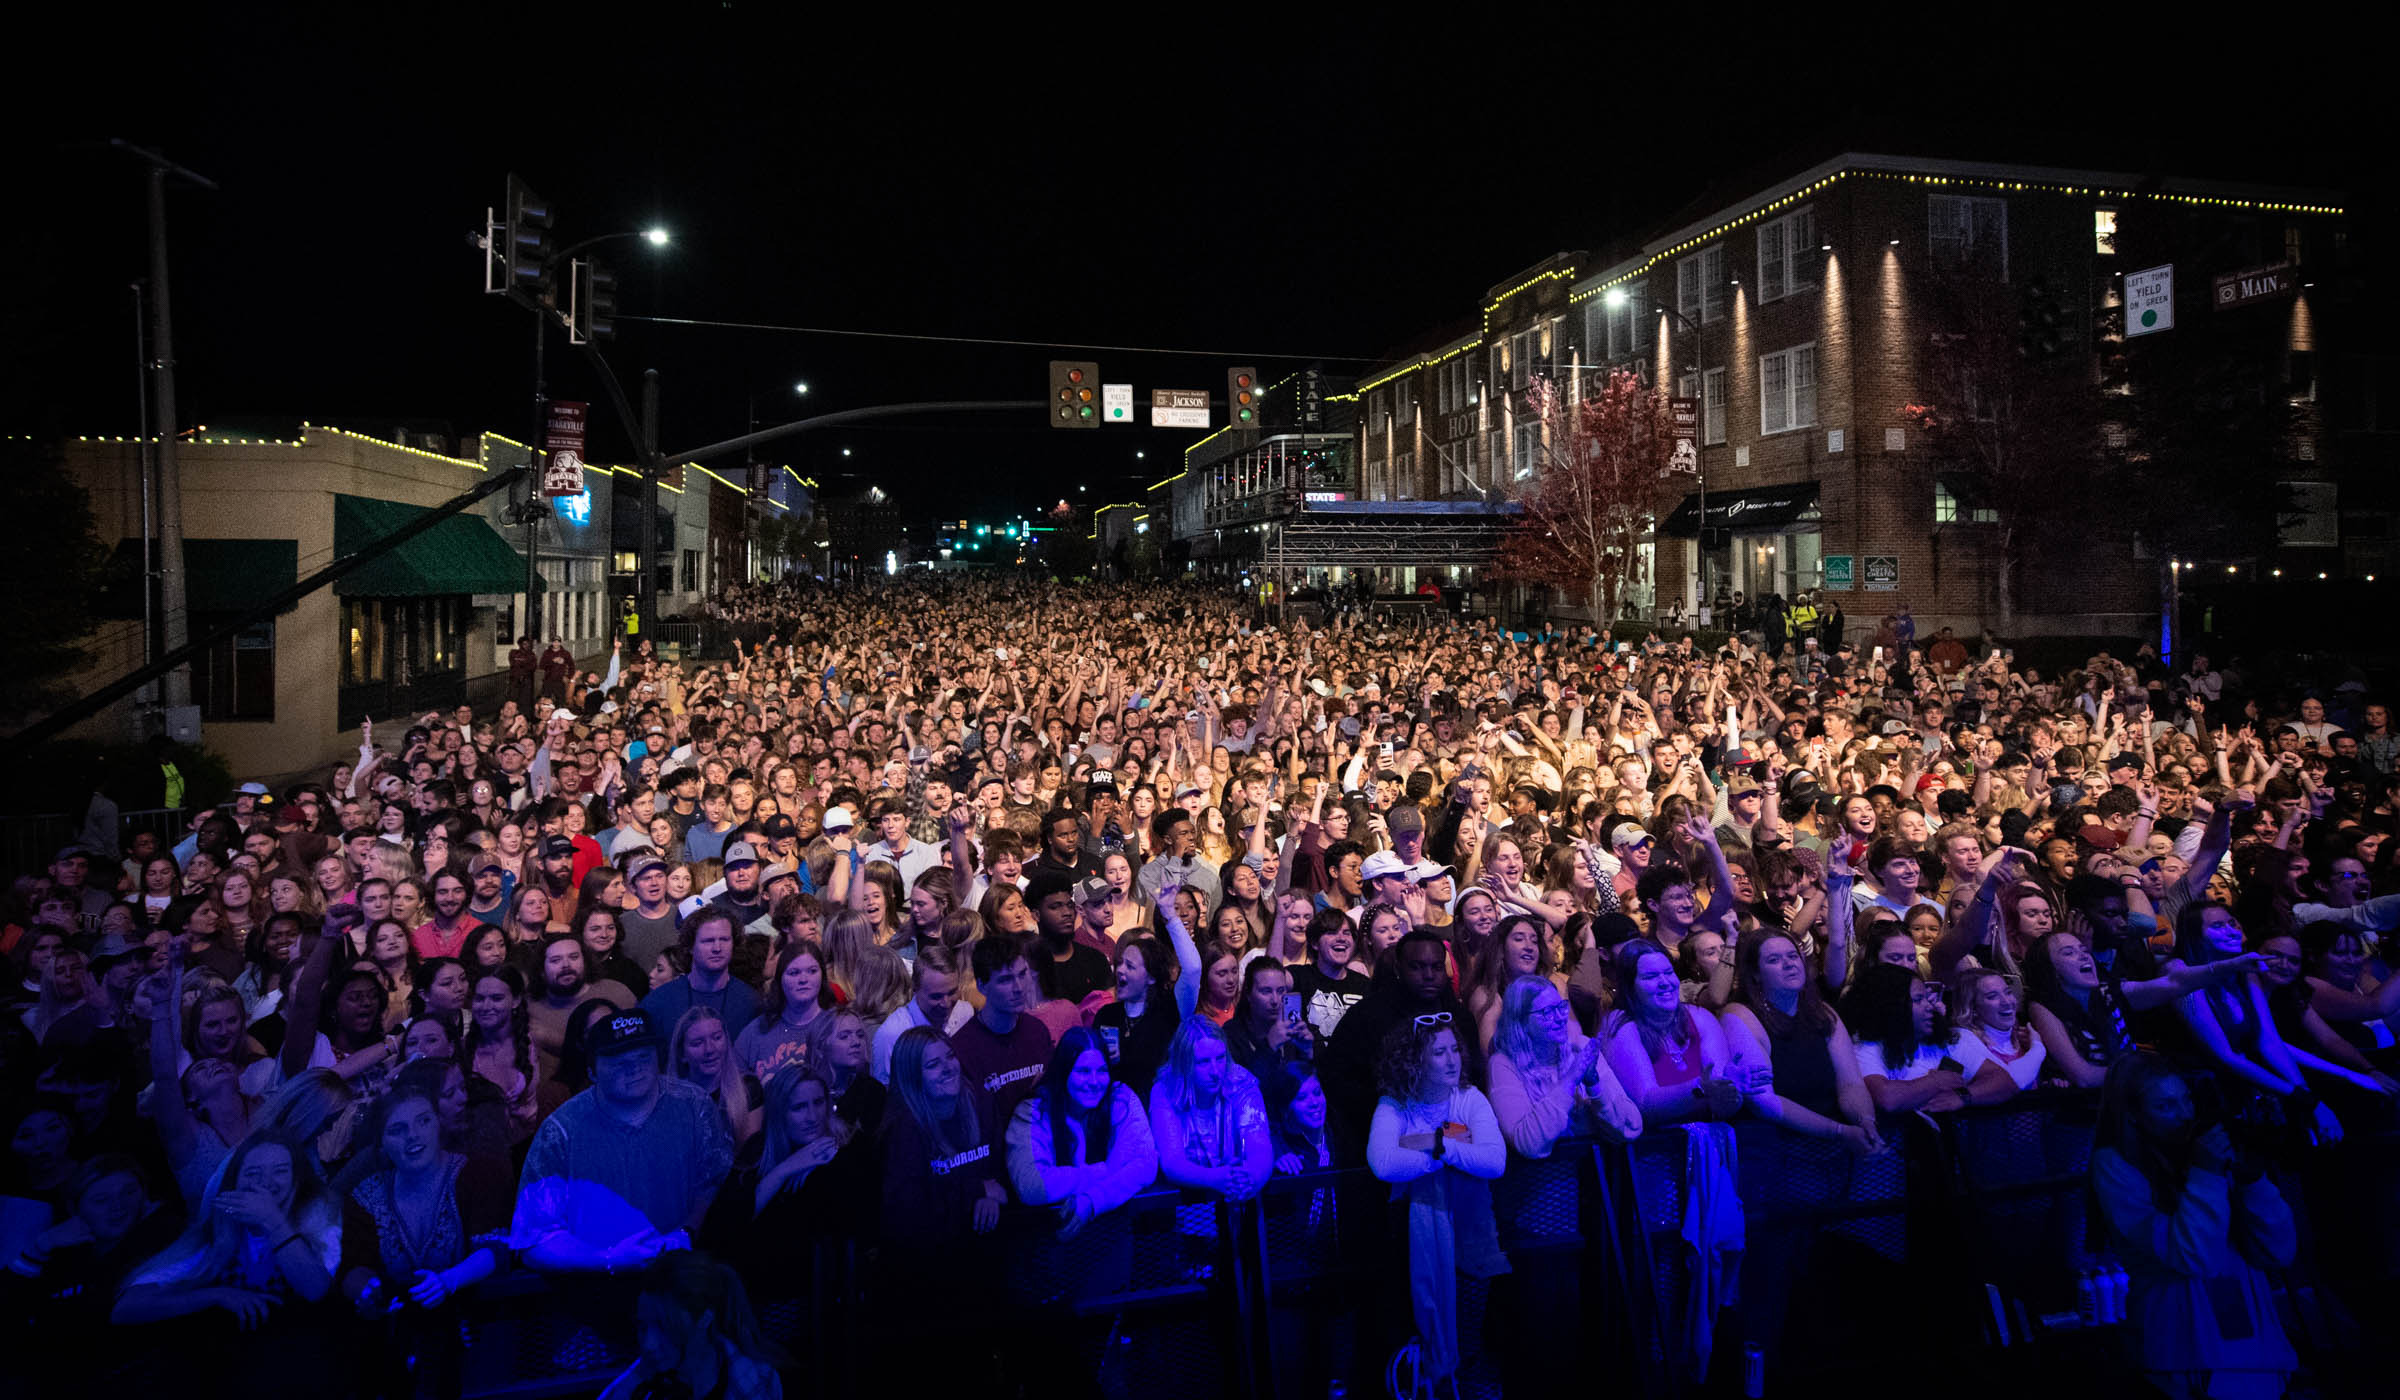 Main Street Starkville is filled with a sea of fans faces, illuminated by the Bulldog Bash stage. 